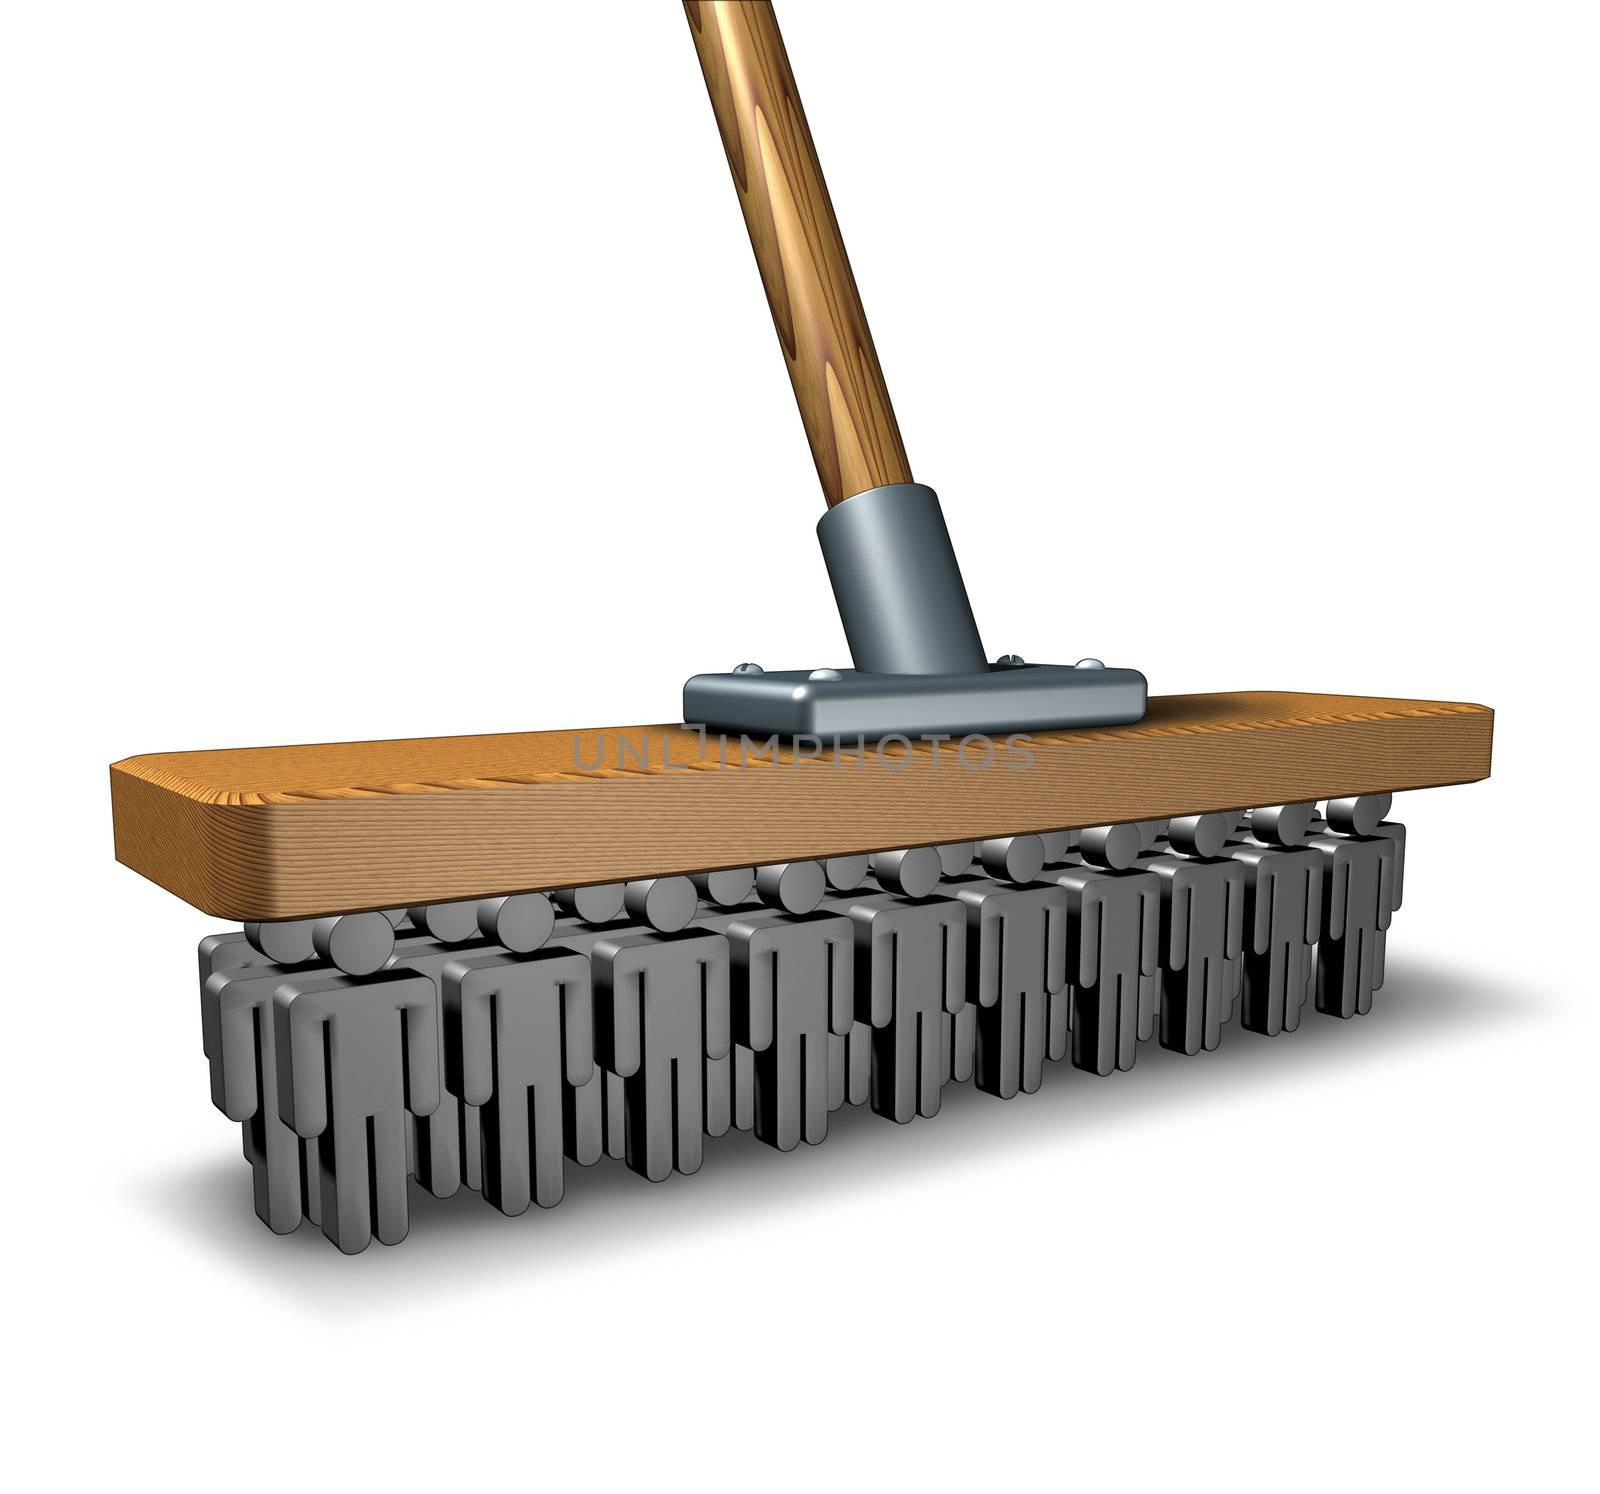 Office cleaning business and business management as a broom with human icons as bristols for reducing corporate waste and over spending with a group of people working as a team to manage costs.